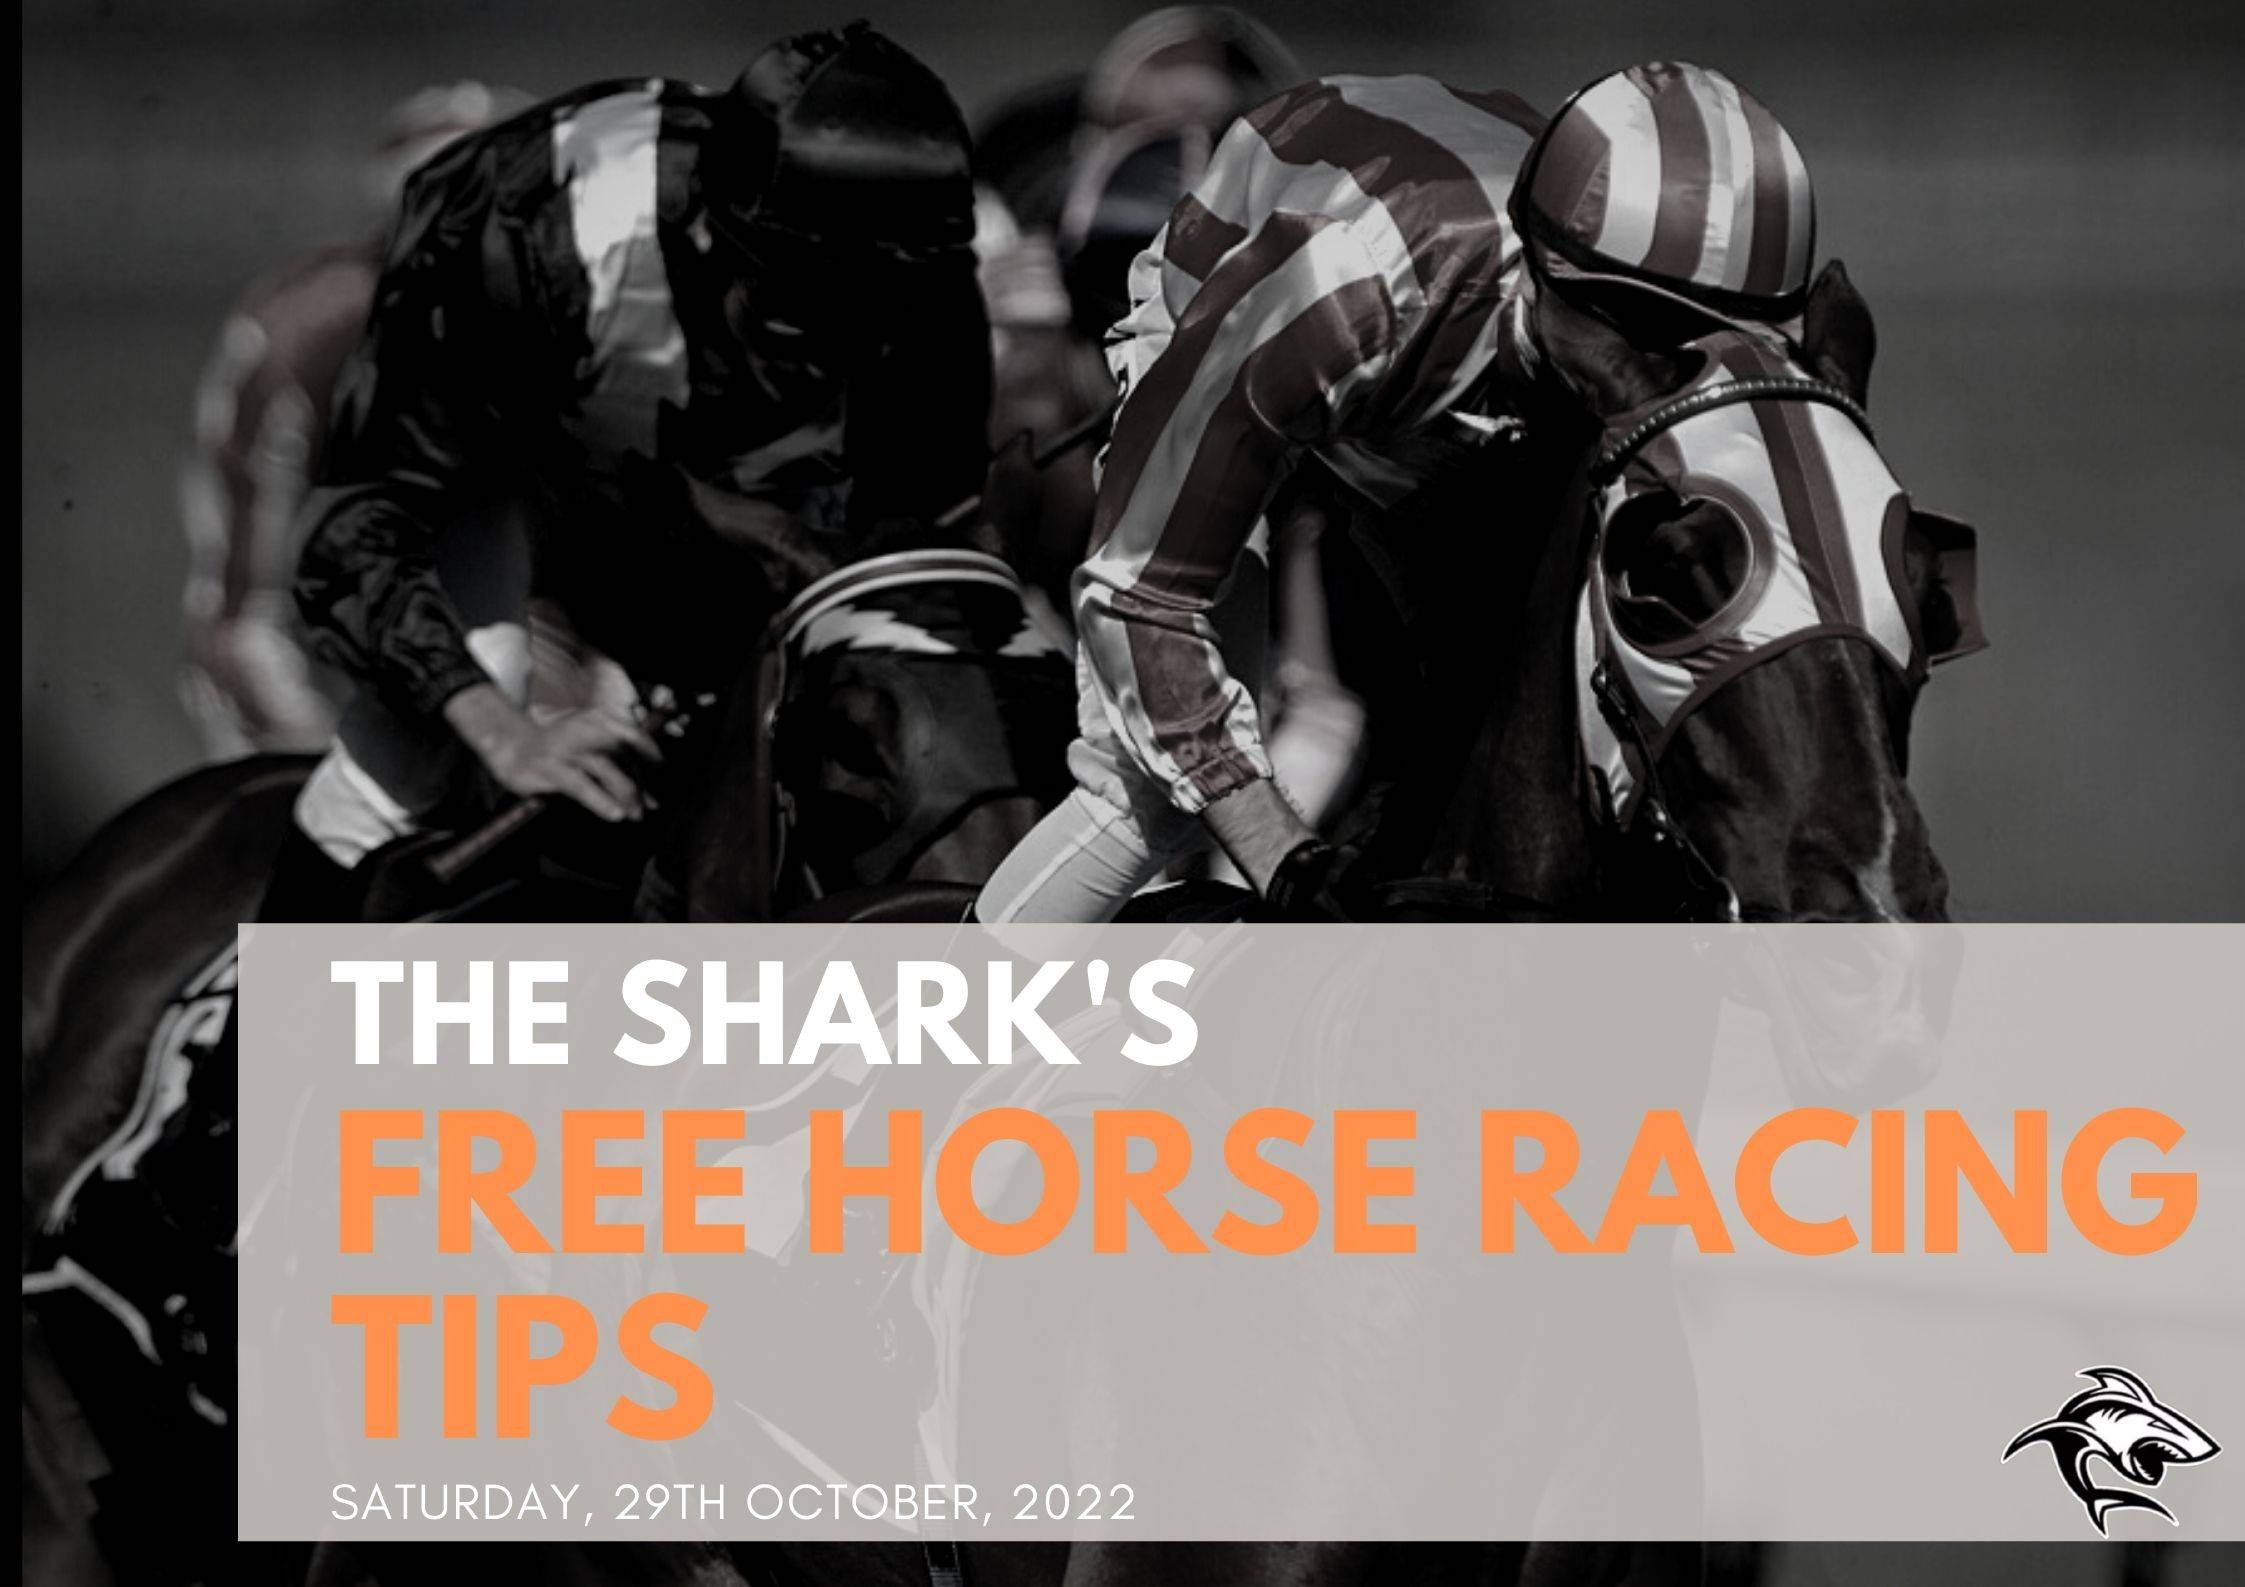 Free Horse Racing Tips - 29th Oct